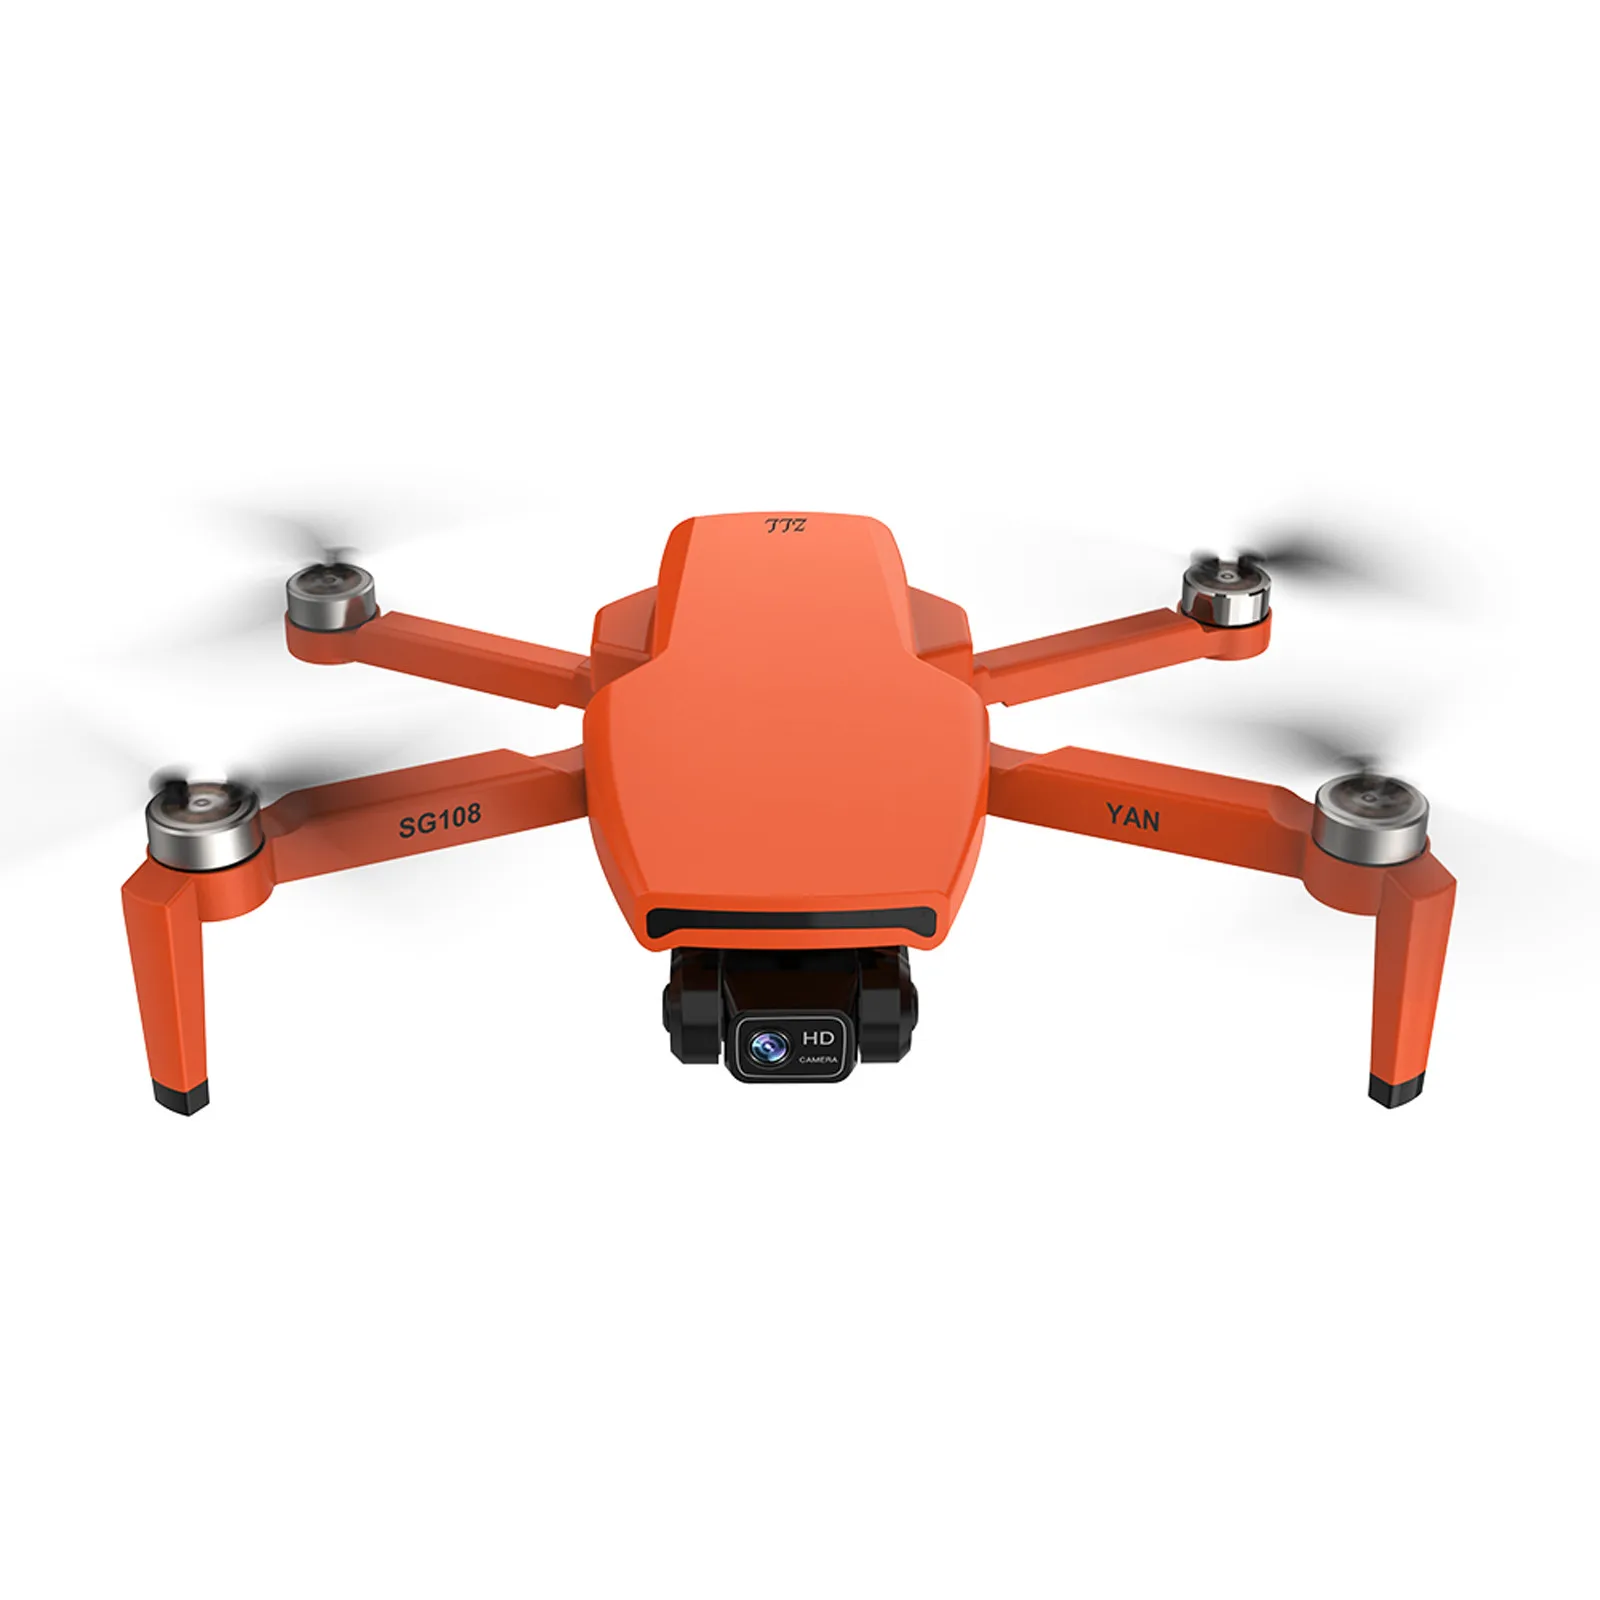 

New ZLRC SG108 Pro Drone 2-axis Gimbal Brushless 4K Professional Camera 5G WIFI FPV Rc Quadcopter 26 minutes Distance 1.2km Dron, Black/ orange